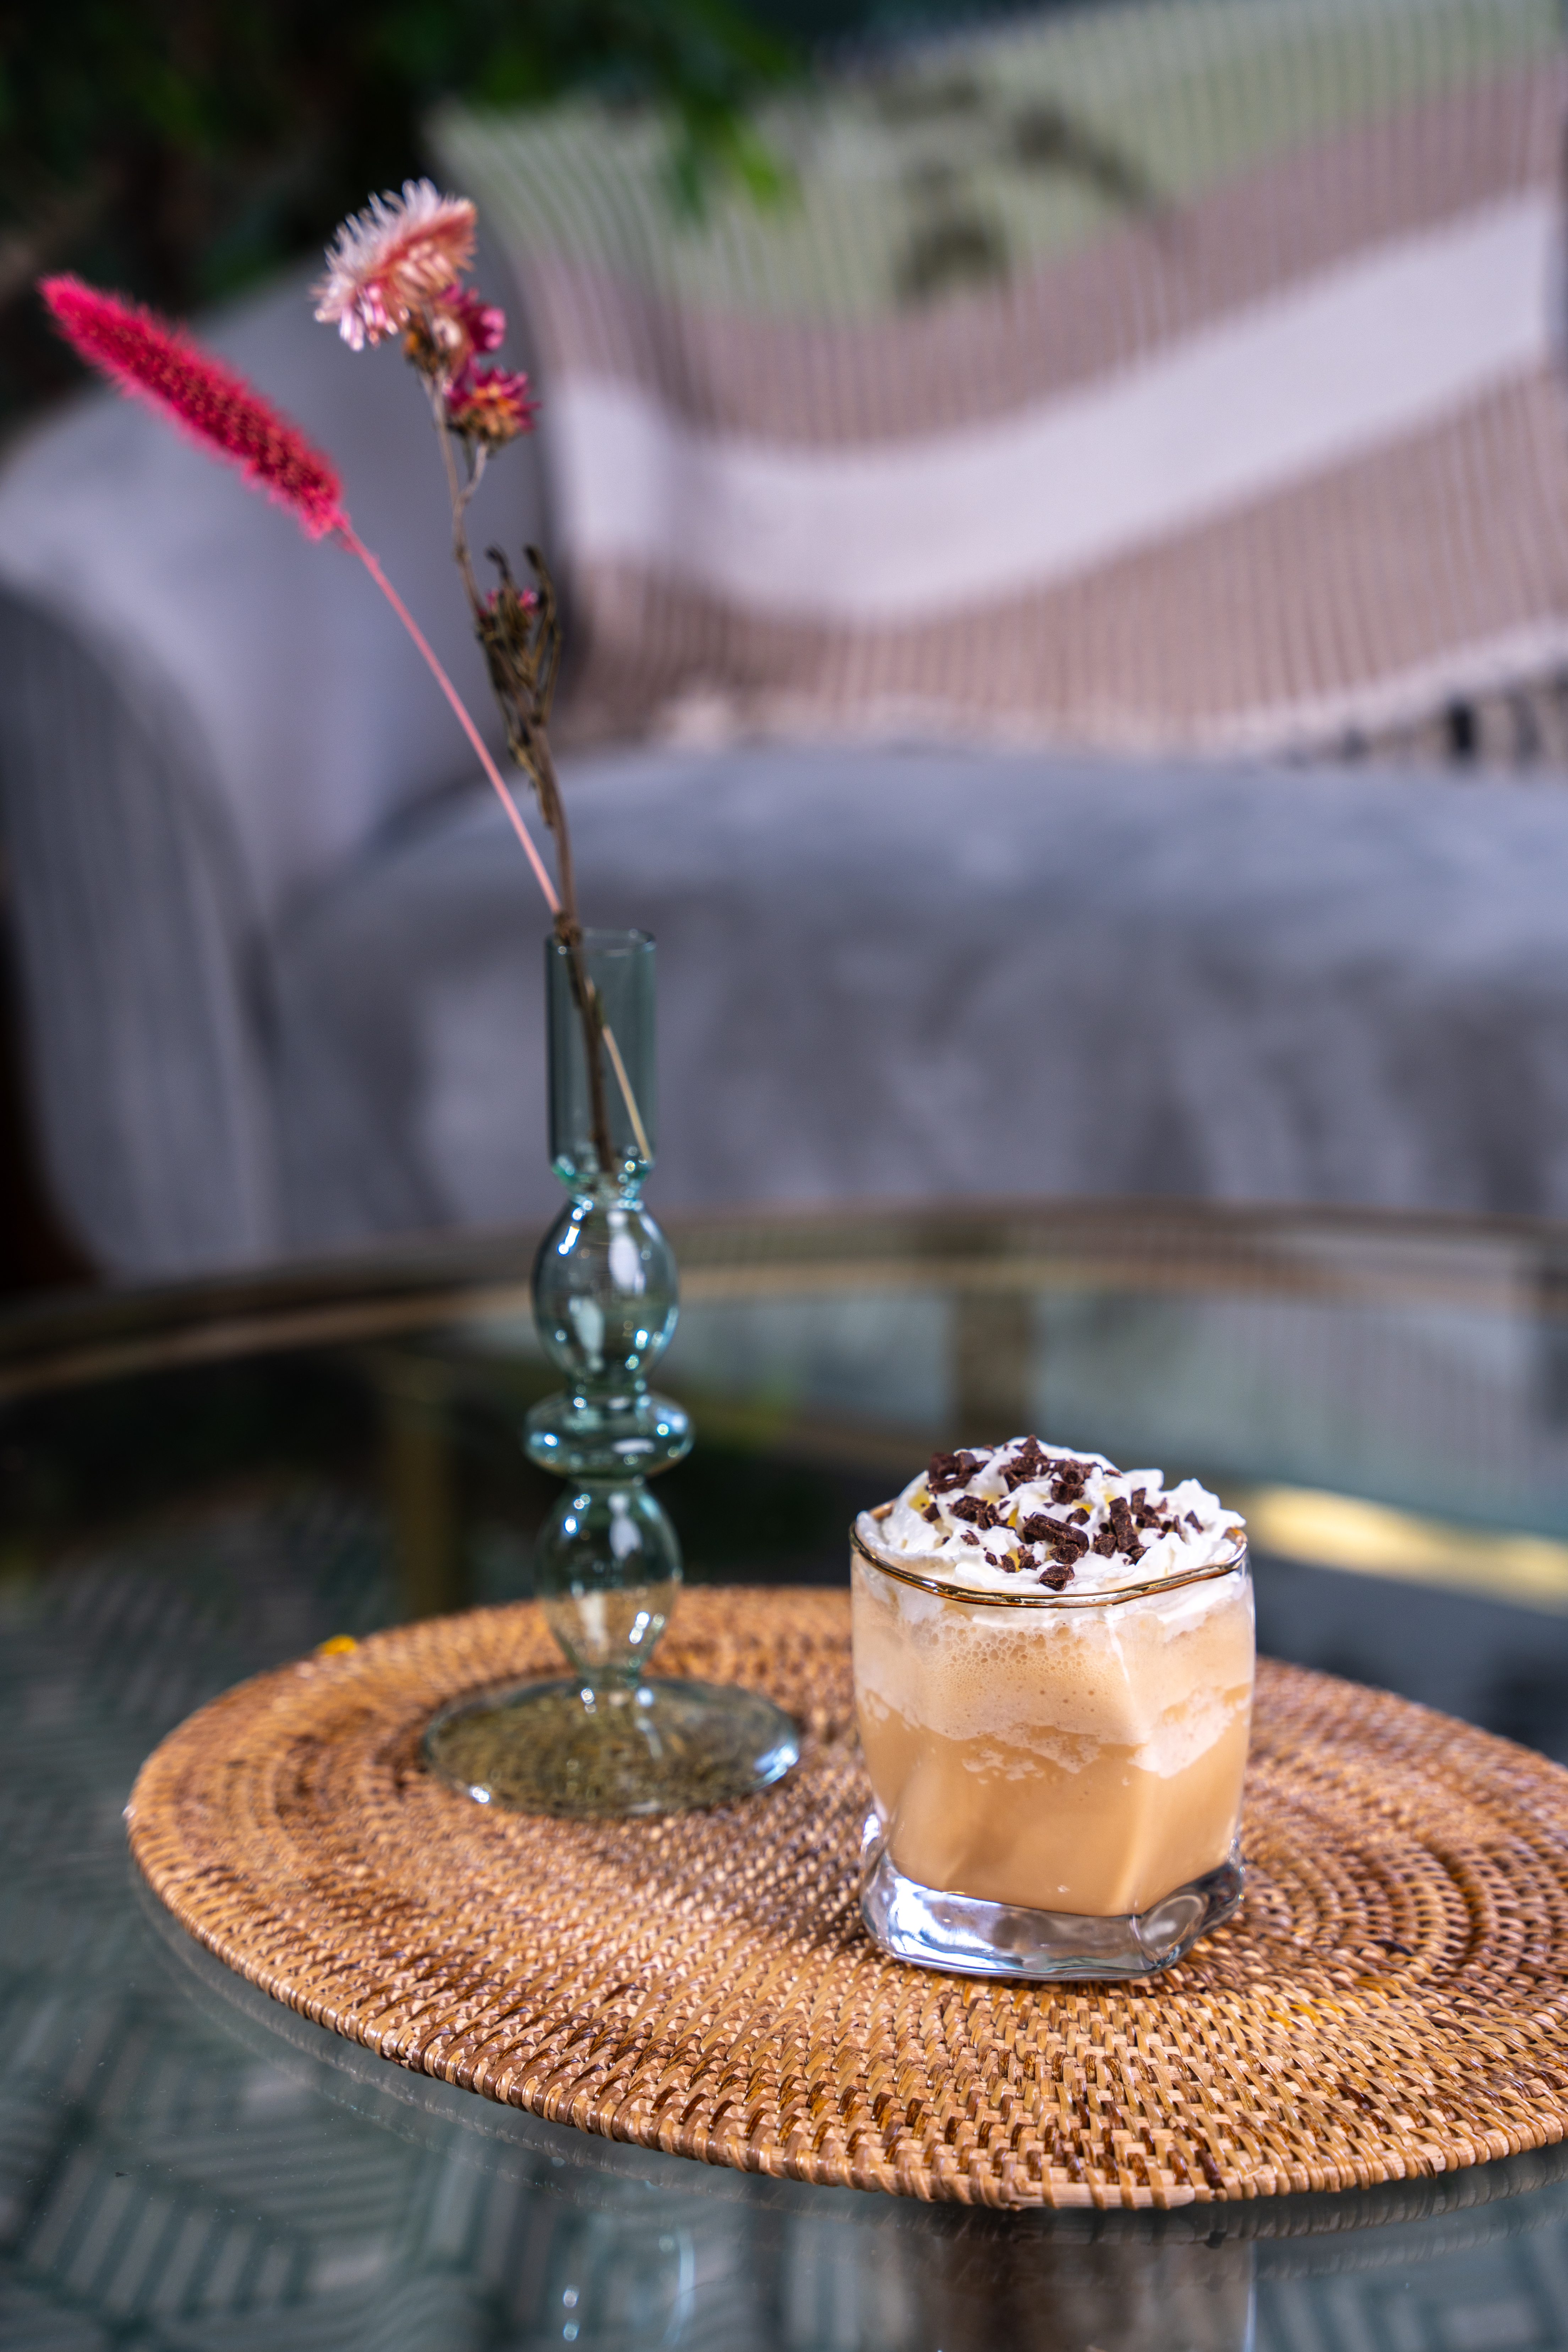 A short tumbler glass is placed on a wicker matt on top of a glass table. The glass contains an iced coffee drink, topped with cream and chocolate shavings. 